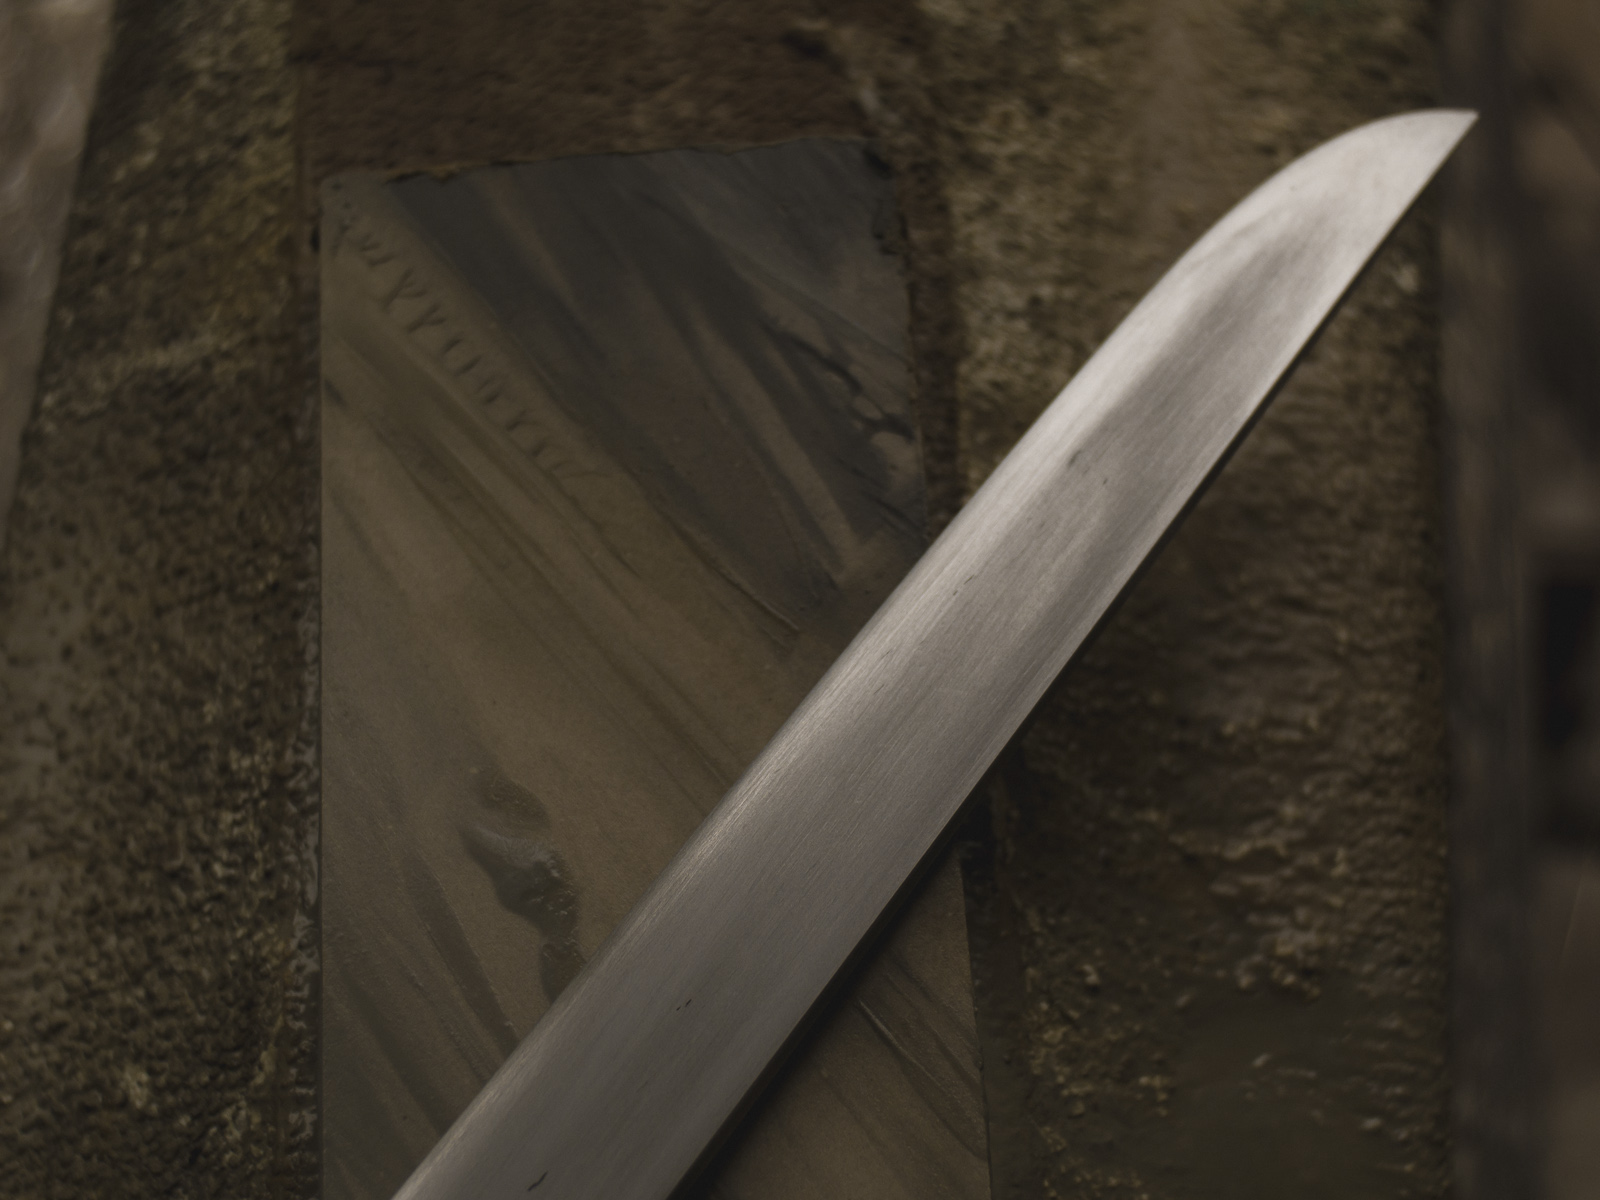 Island Blacksmith: Hand forged yoroidoshi tanto, made from reclaimed and natural materials using traditional techniques